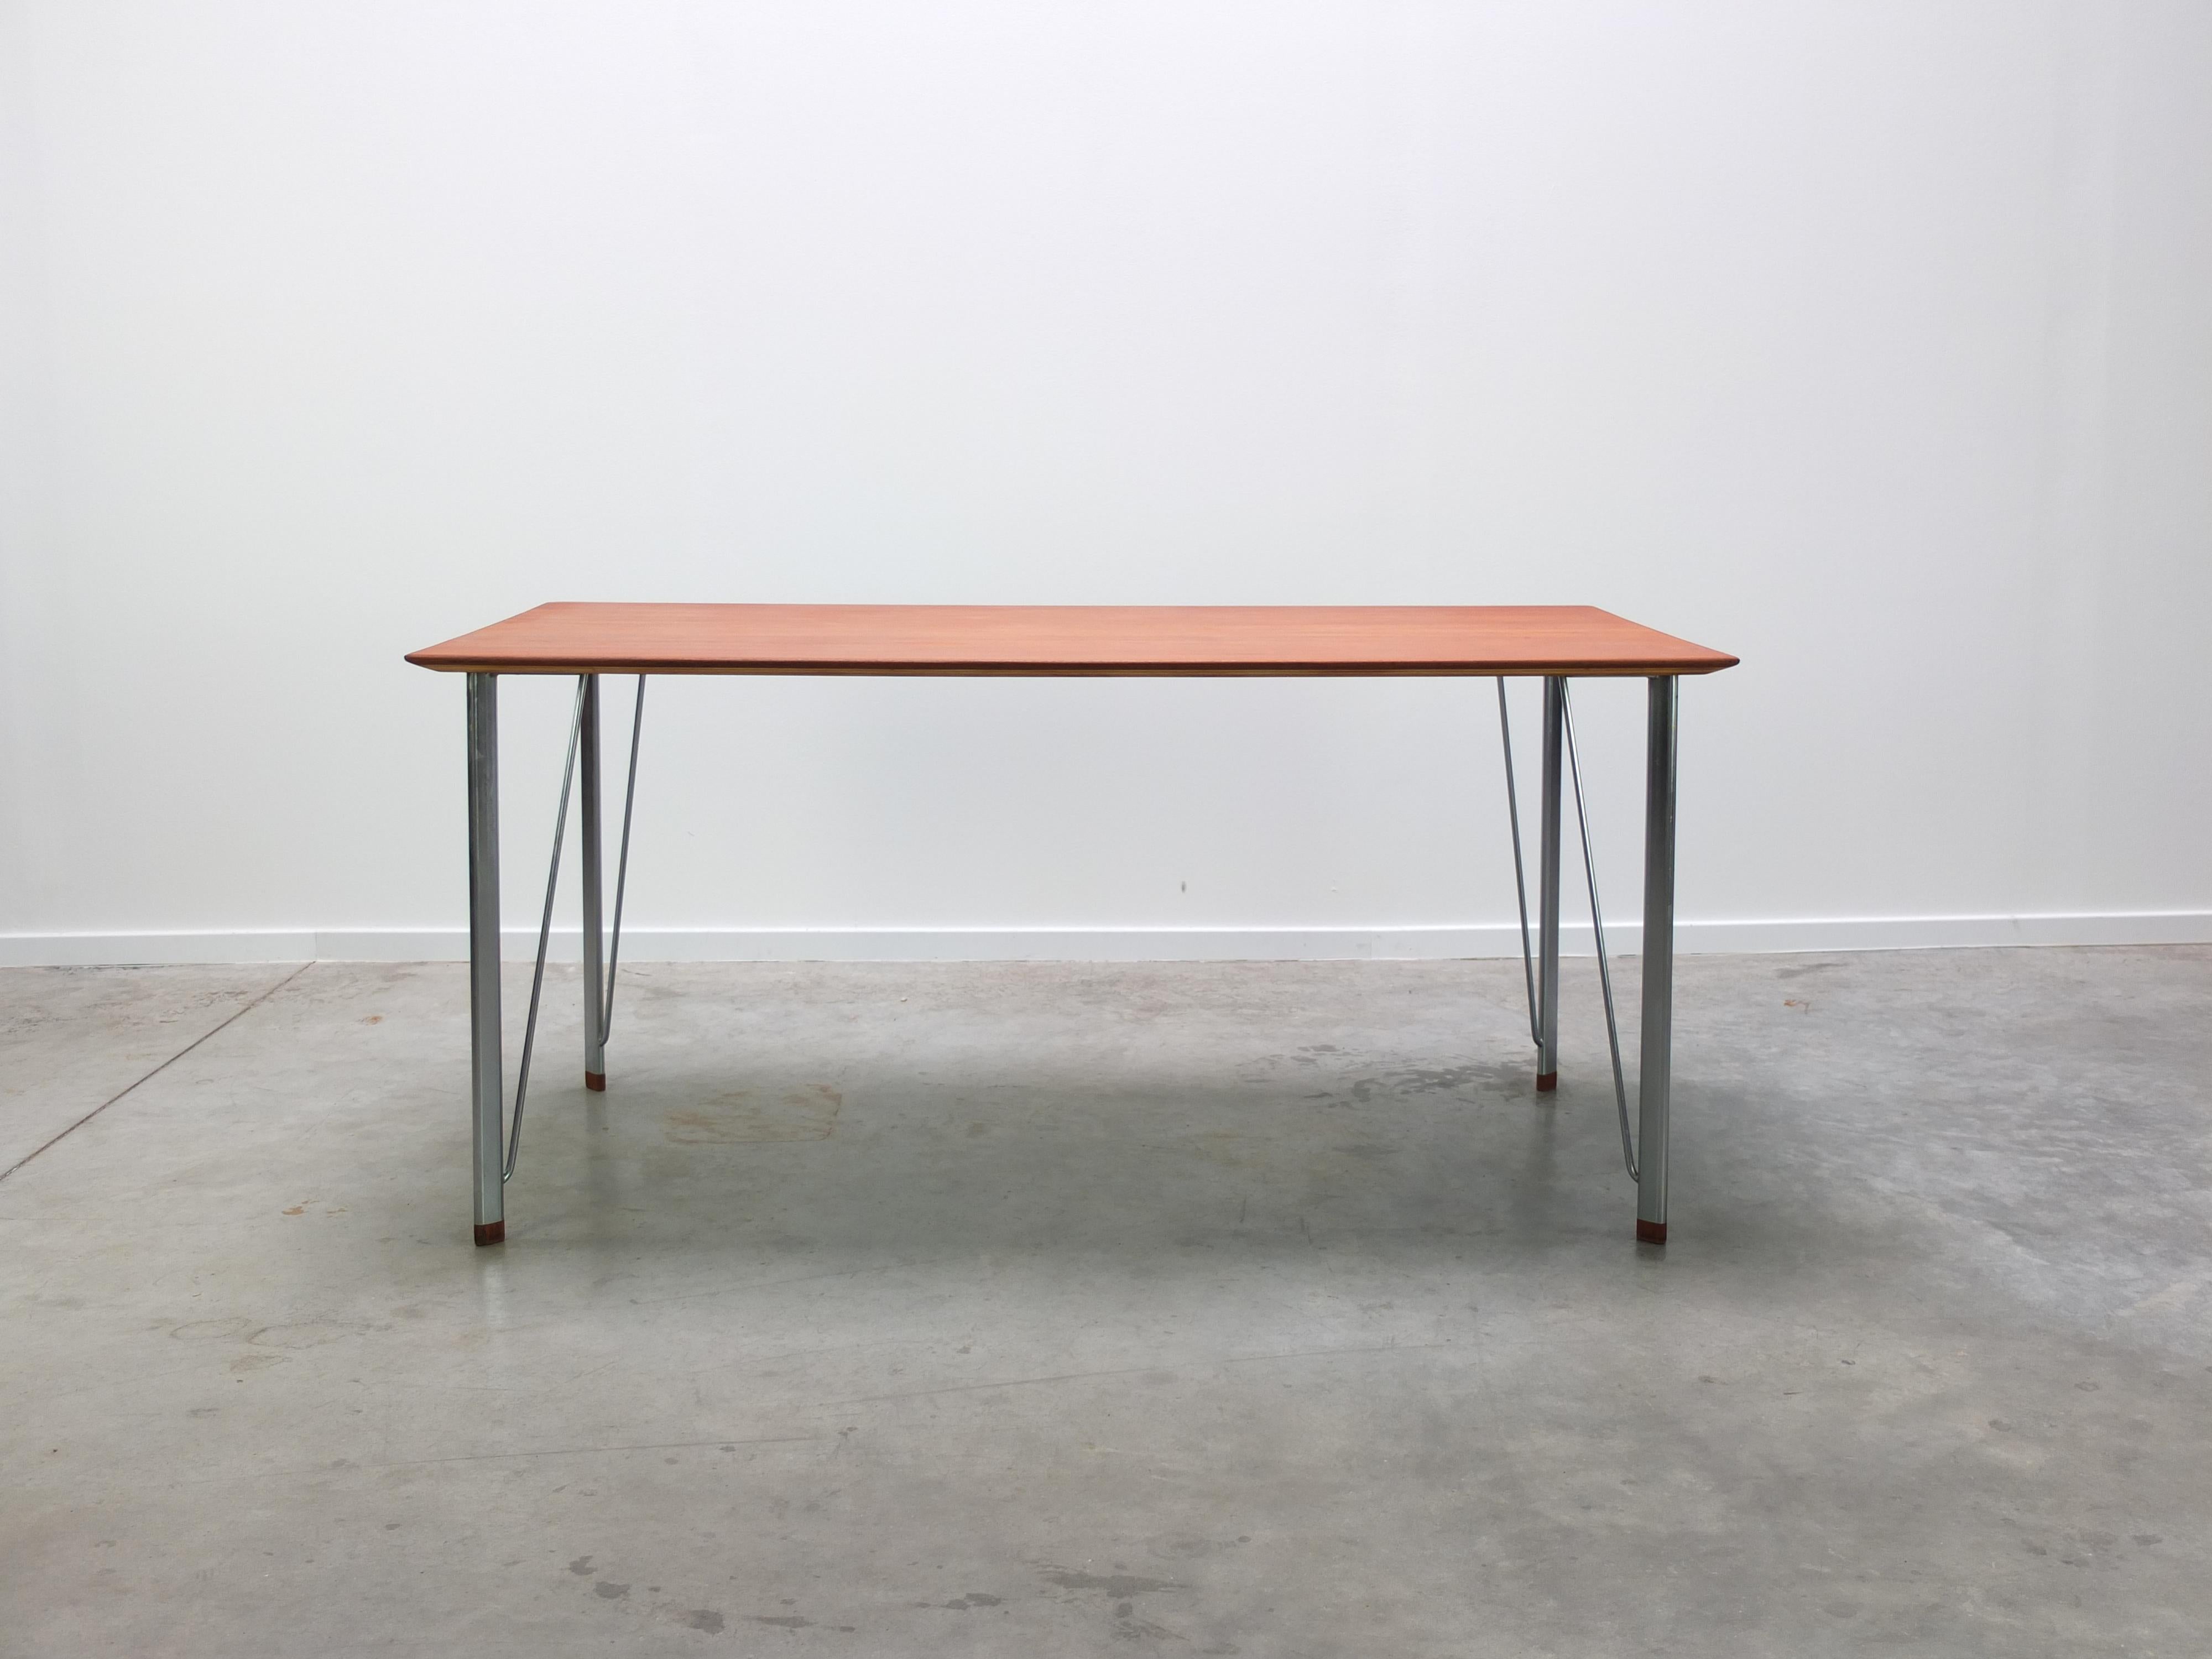 A rare model ‘3605’ dining table or desk designed by Arne Jacobsen for Fritz Hansen in 1955. This table has only been produced for a couple of years during the 1950s and is therefore hard to find. A very minimalistic design with a top made of teak